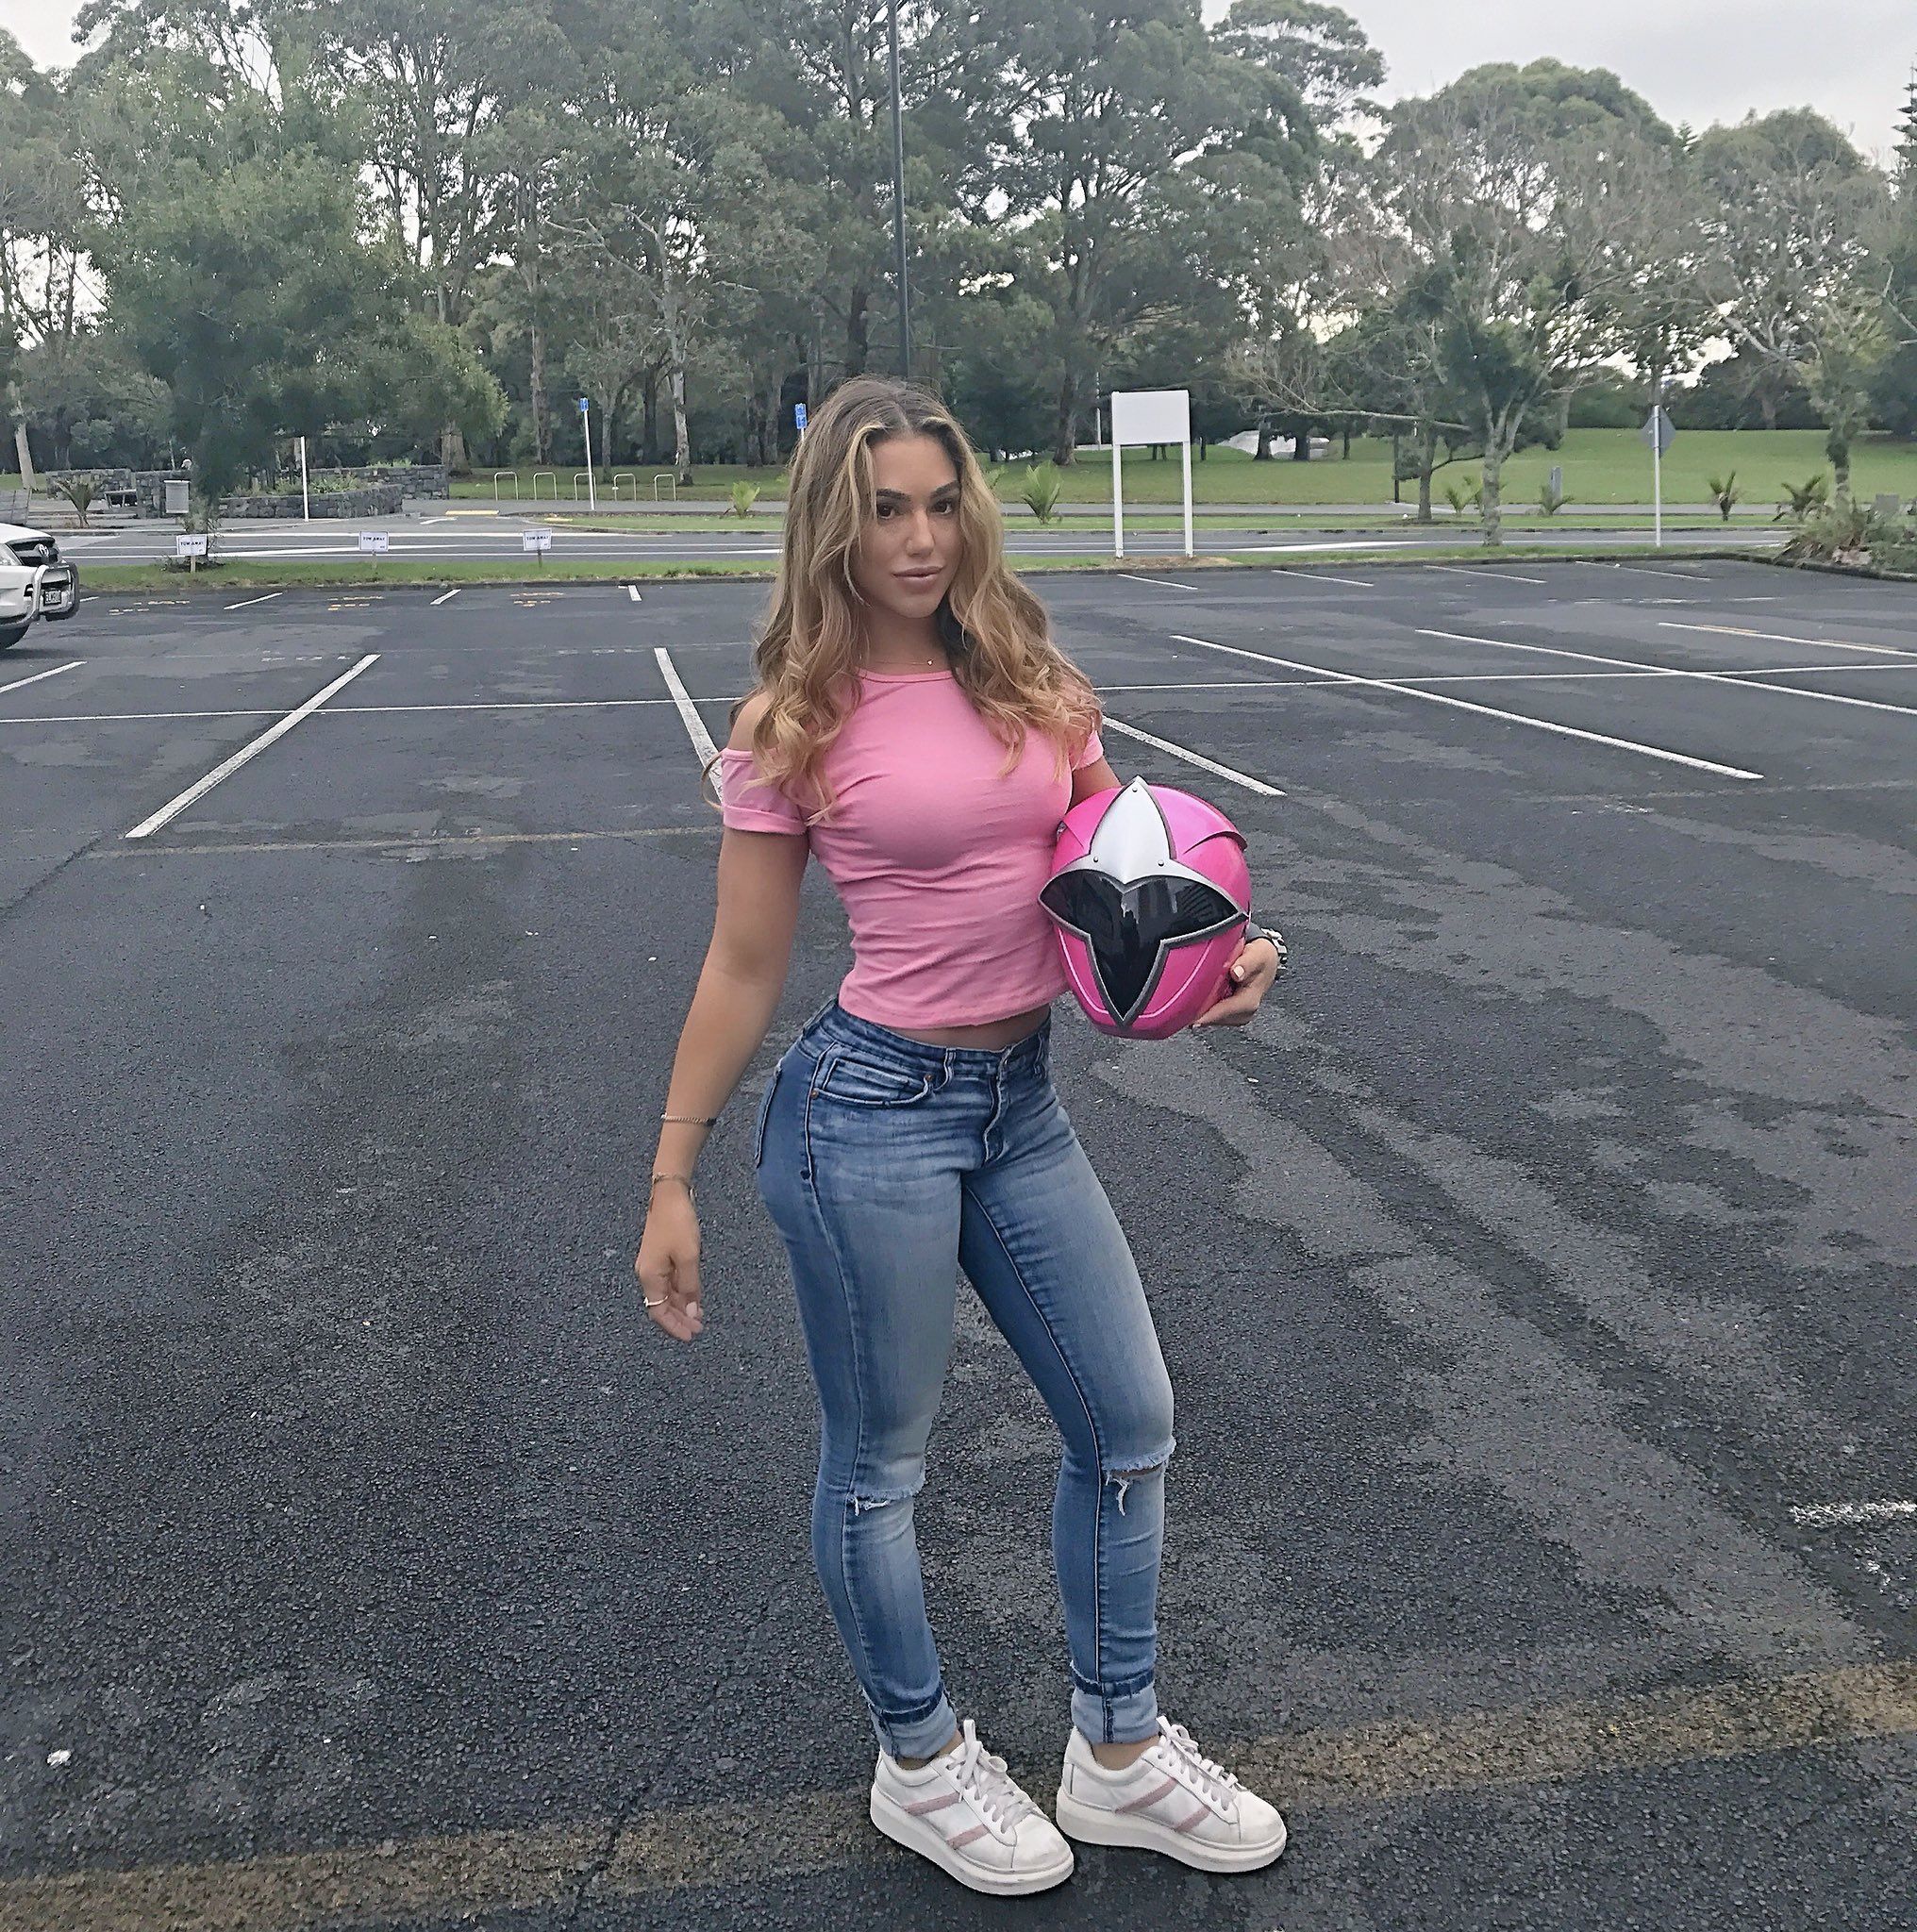 Chrystiane Lopes in Pink